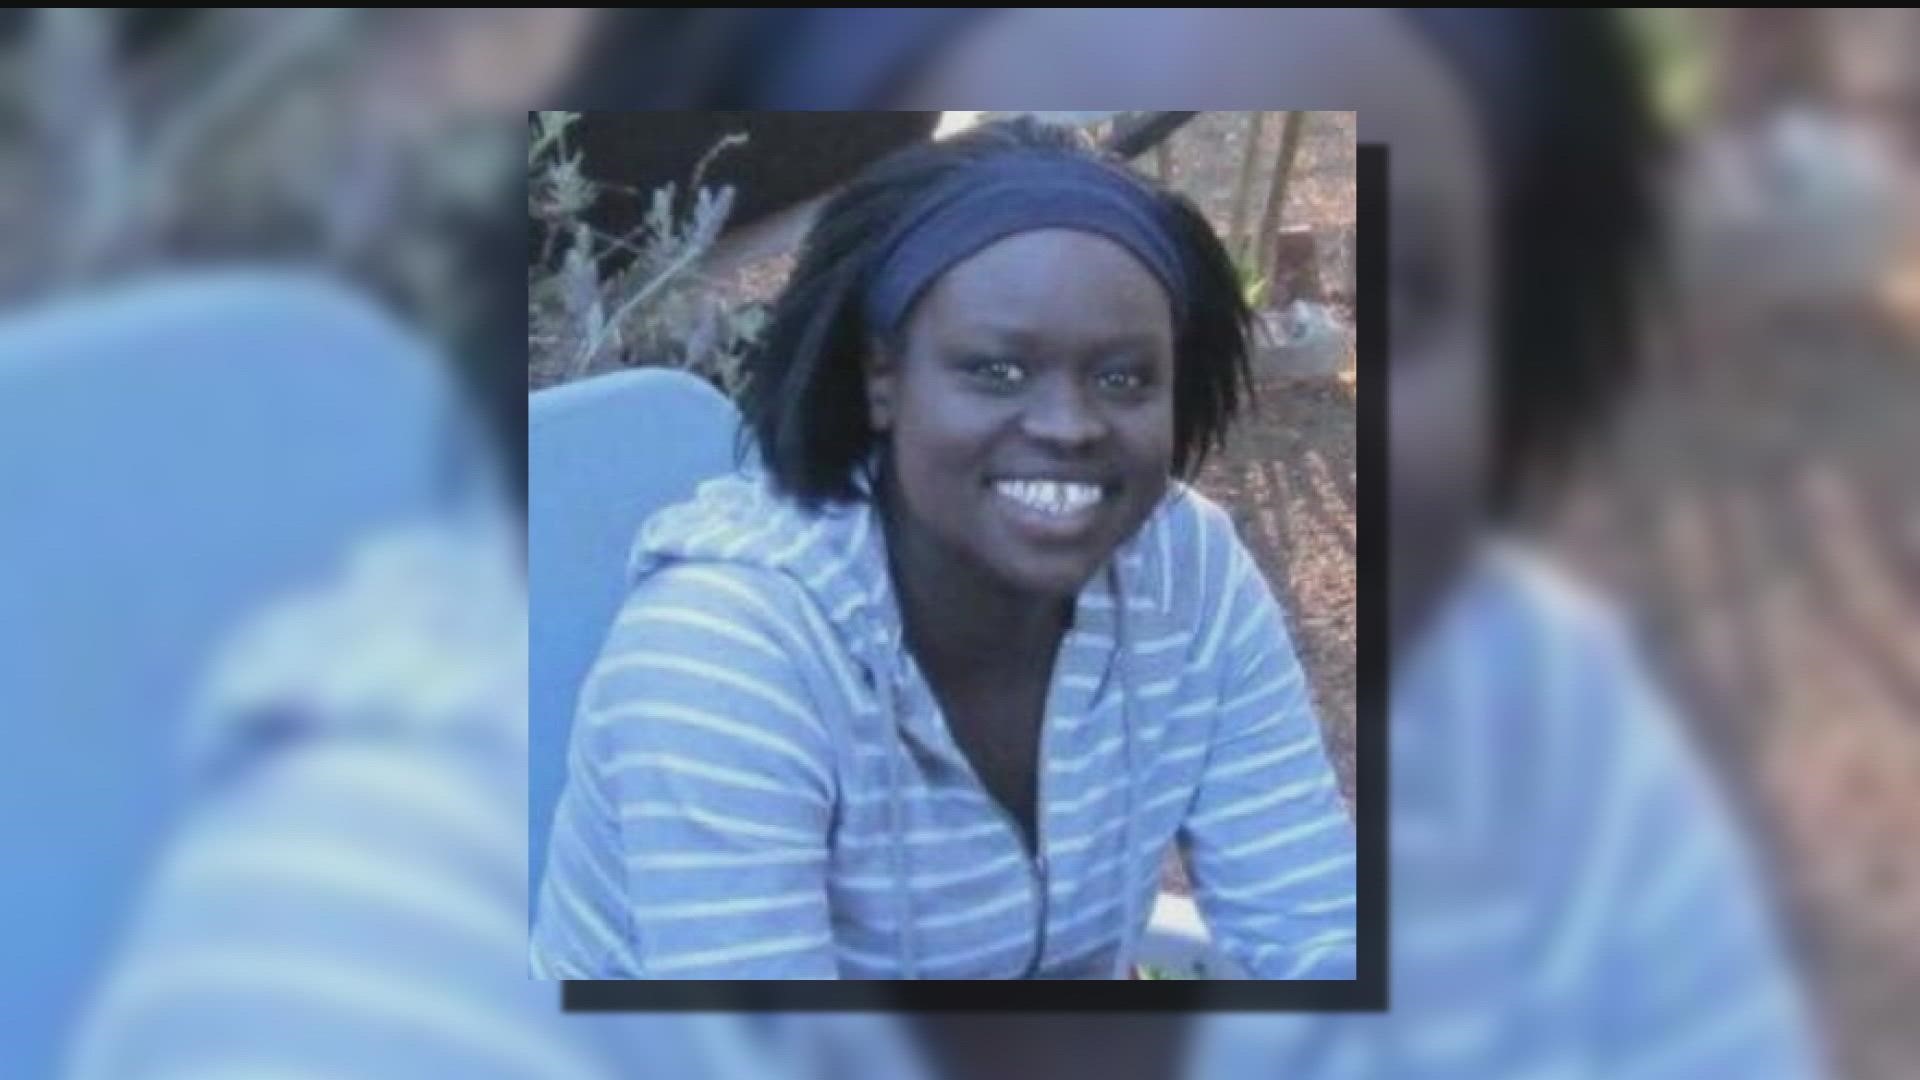 Nyawuor James Chuol has not been seen since the night of April 25. Her family is pleading with the public for help.